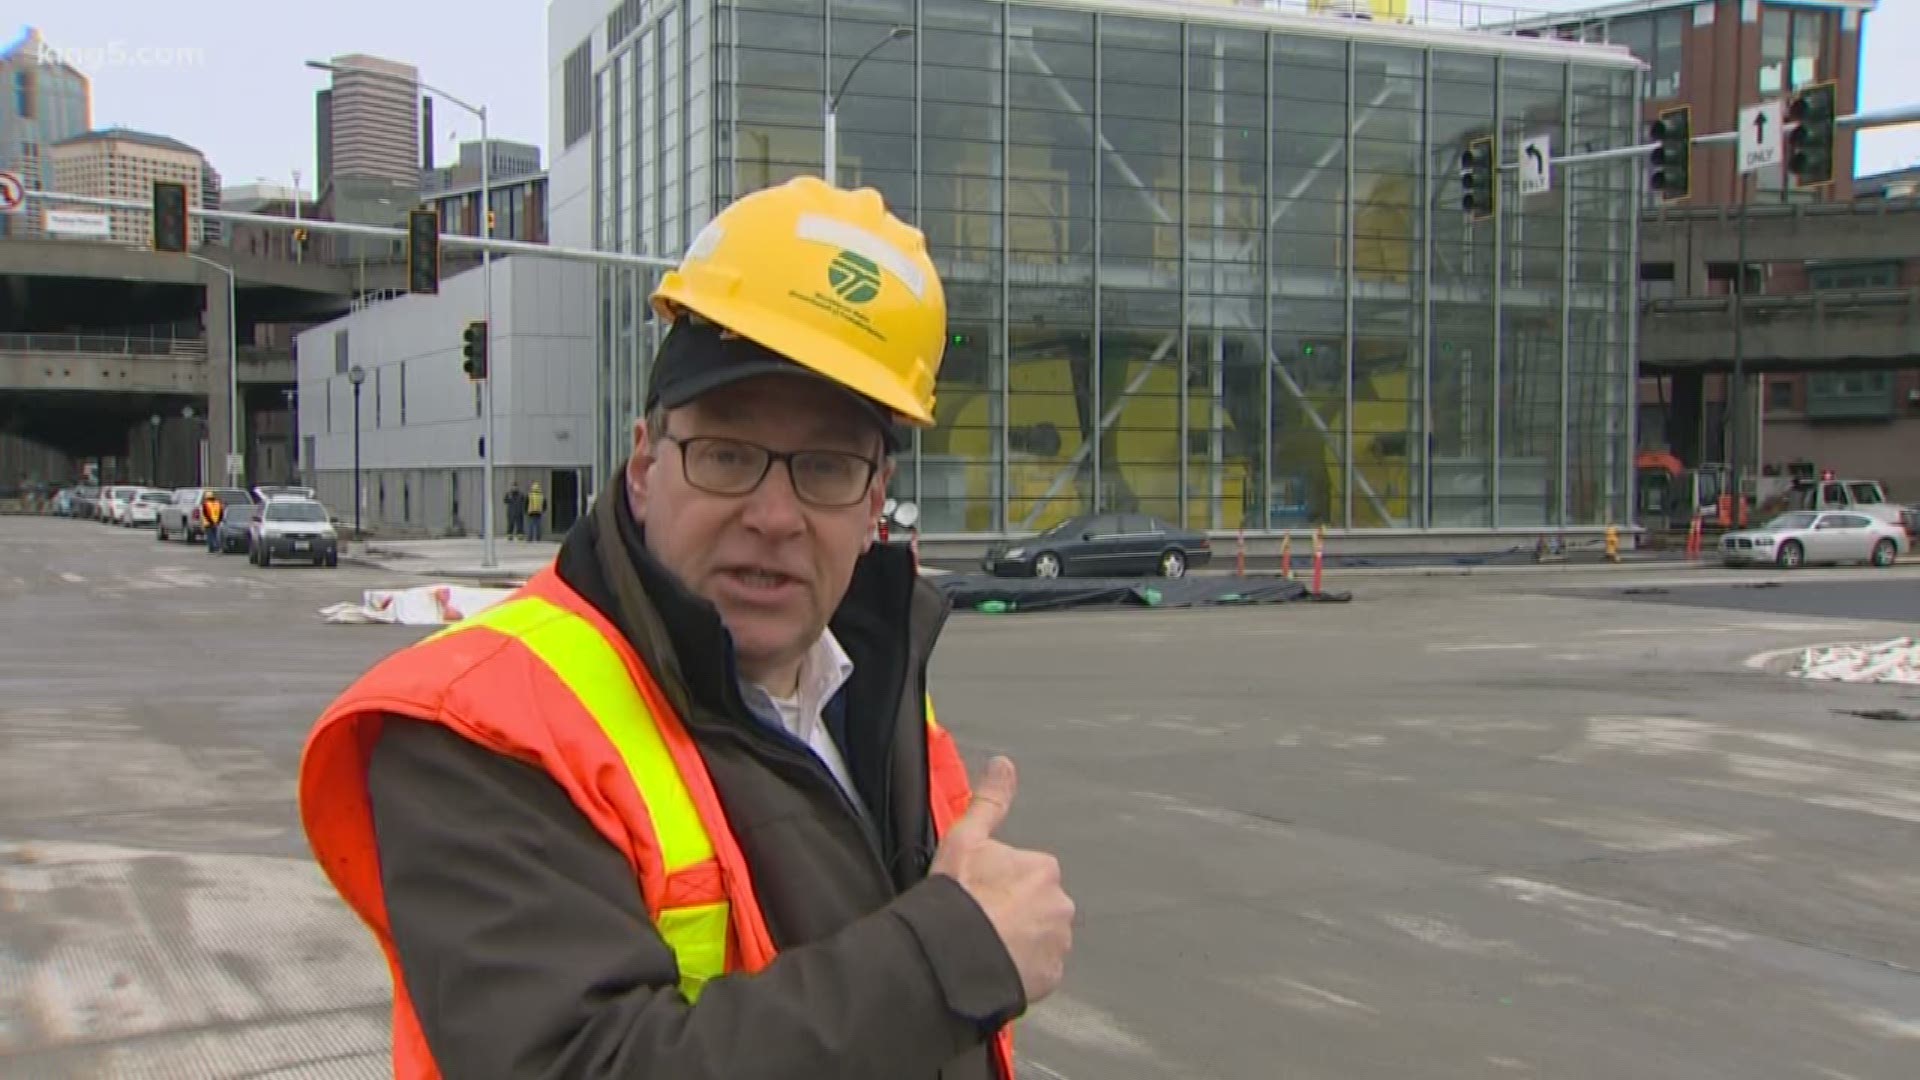 We have made it one week without the Viaduct! Contractors have been working to connect the tunnel since the closure last Friday. Glenn Farley went behind the scenes of the construction zone to bring us a Fast 5.